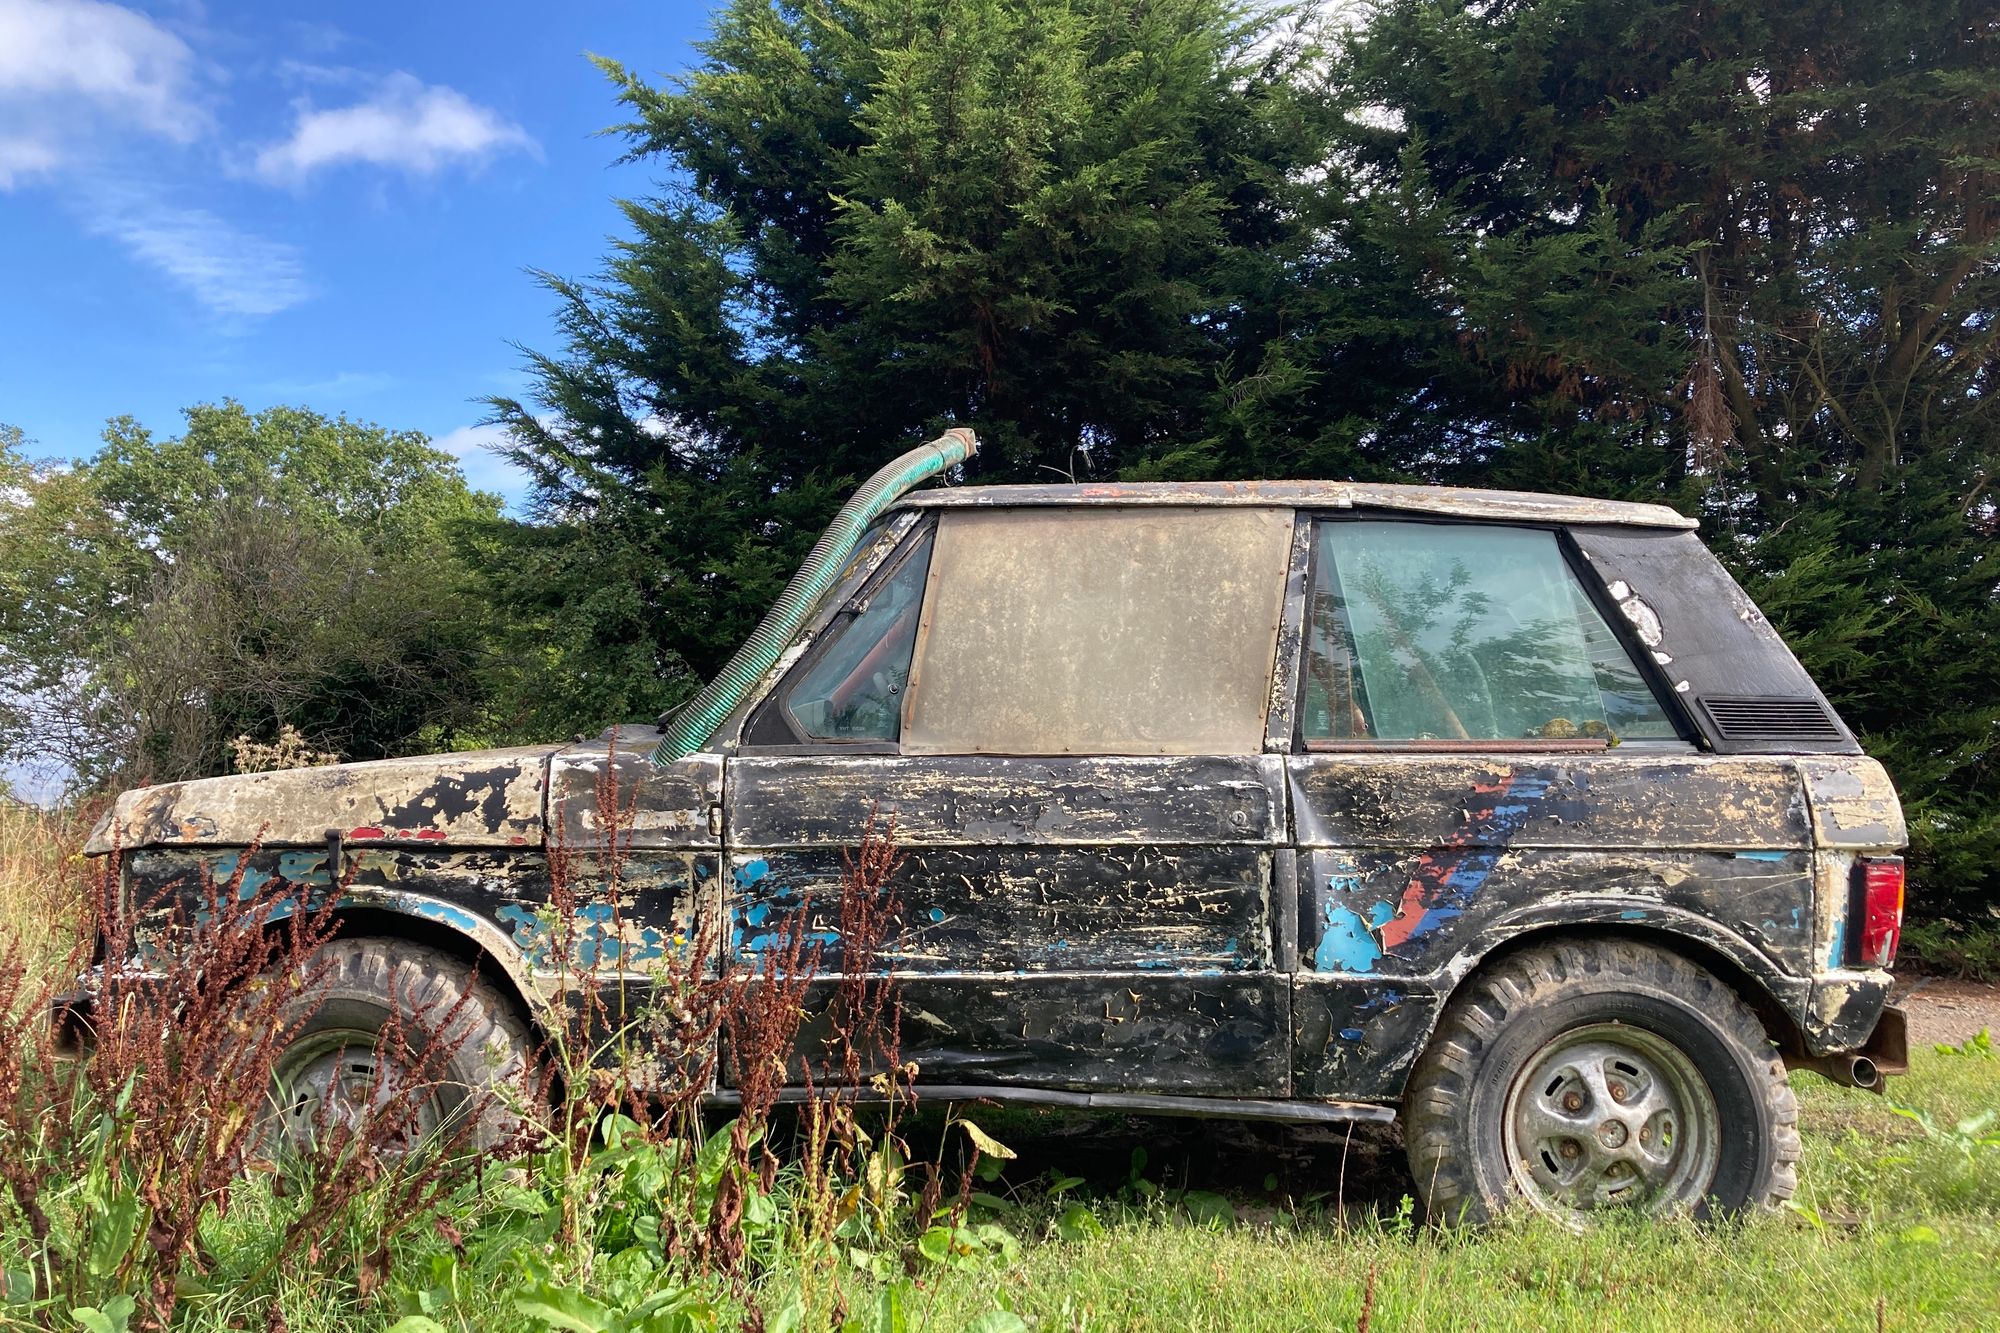 A battered old 4x4 with multi-coloured paintwork sits in an overgrown patch of grass.